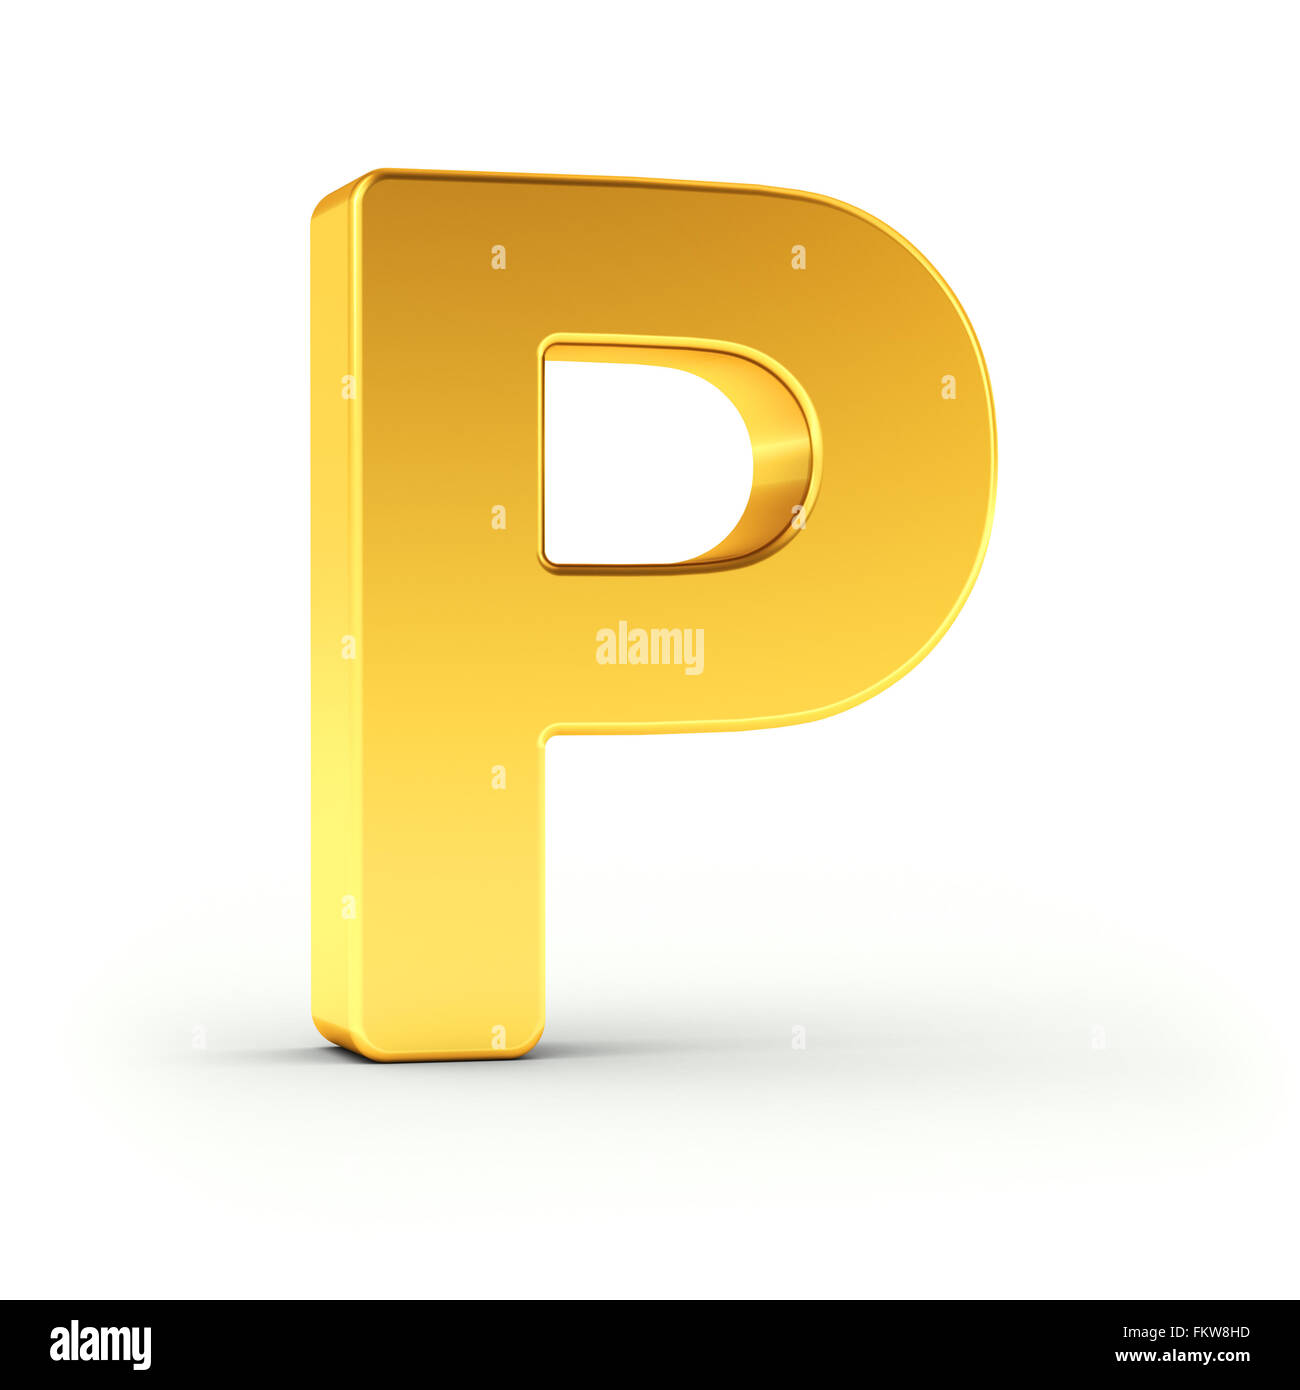 The Letter P as a polished golden object Stock Photo